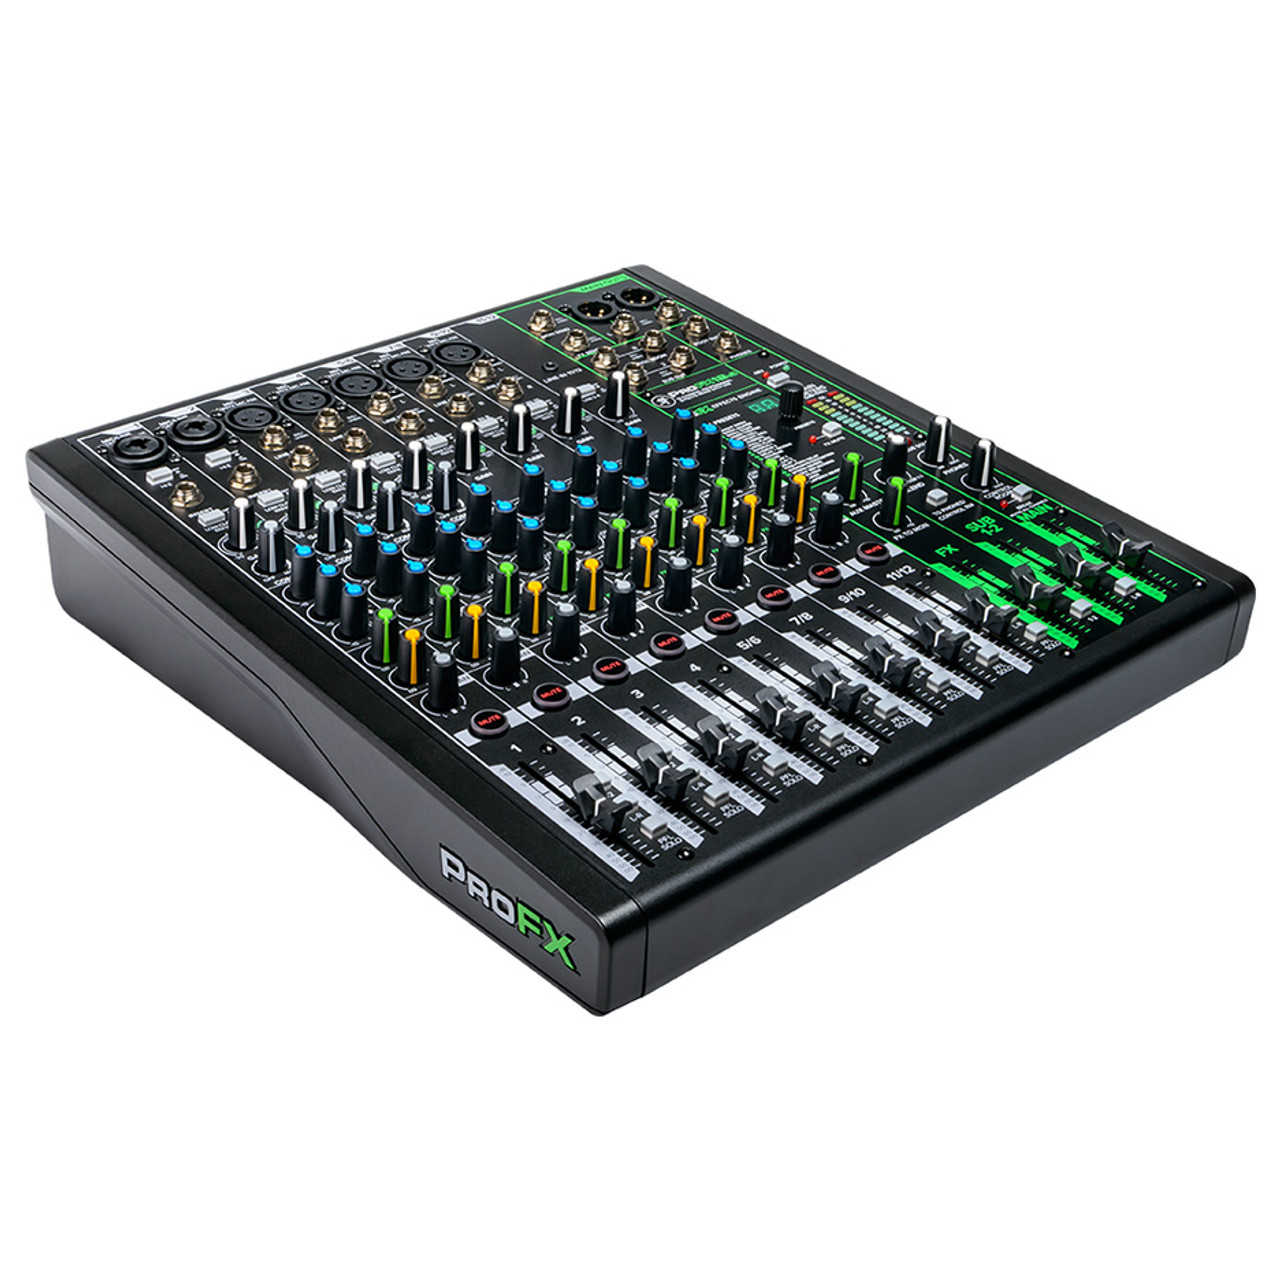 ProFX30v3 30-Channel Professional Analog Mixer with USB